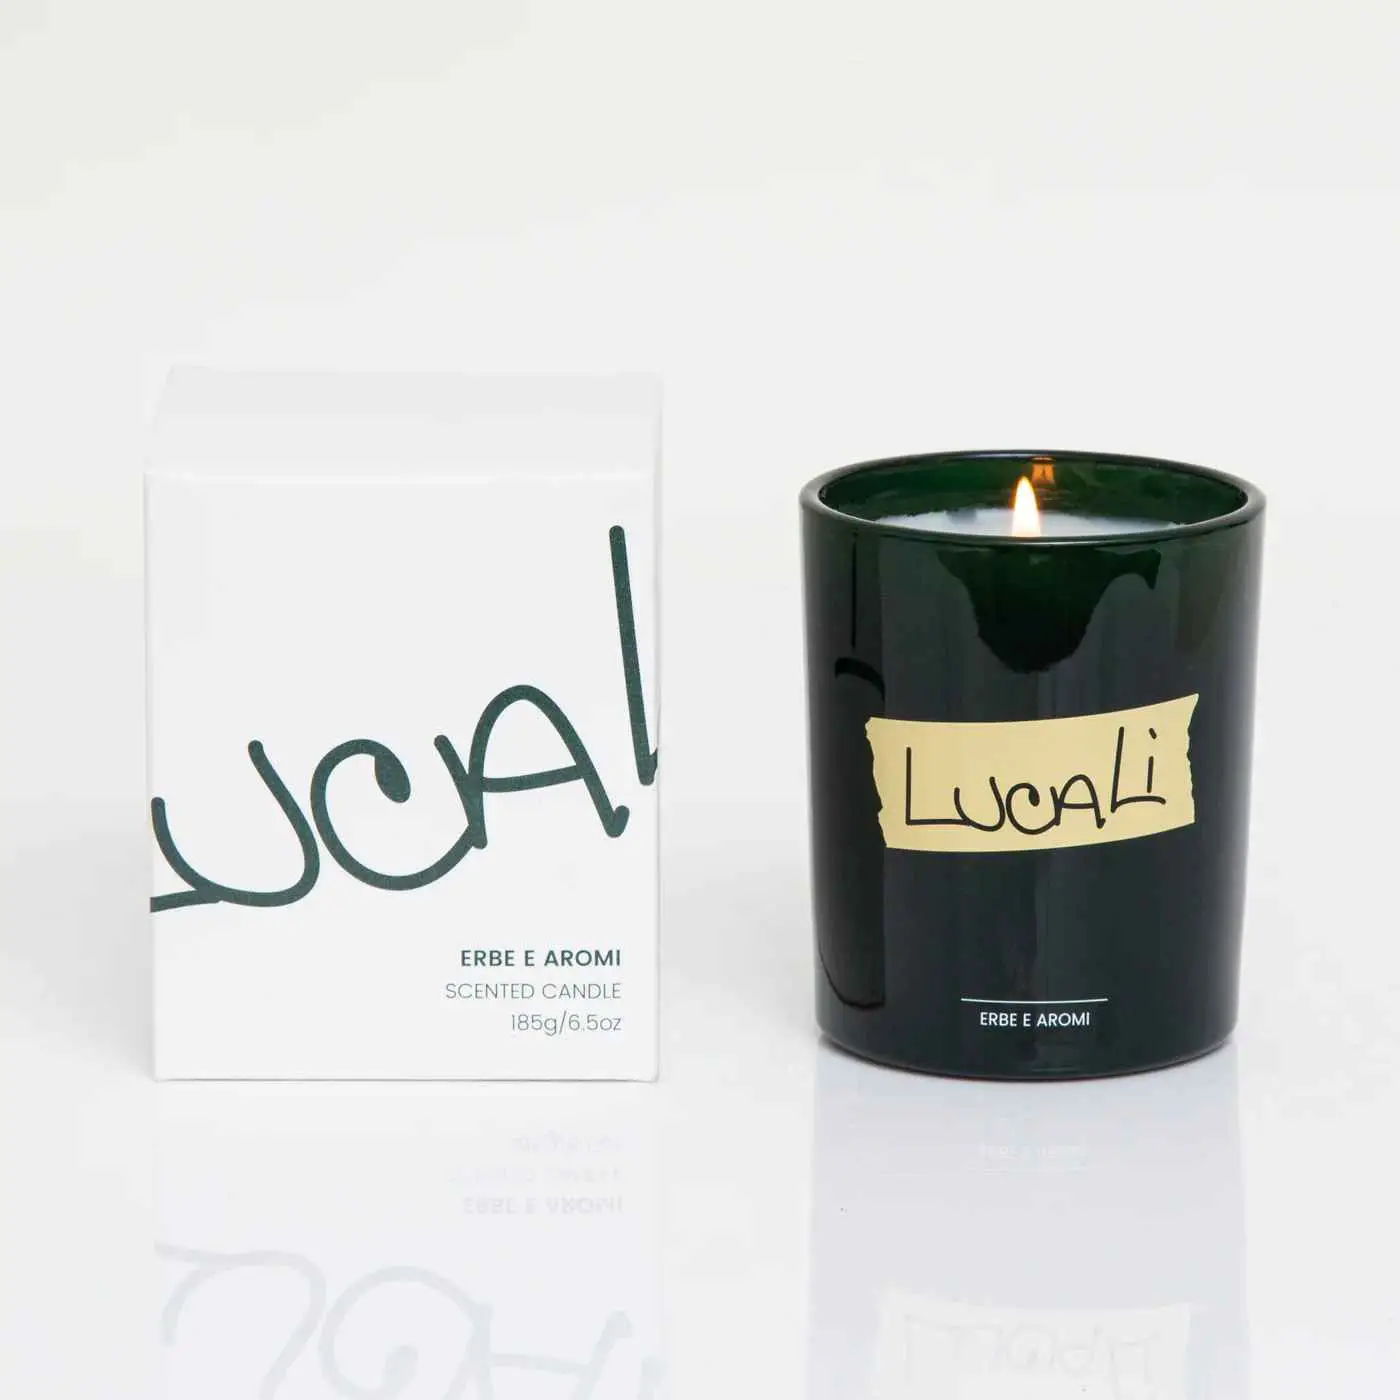 Erbe E Aromi Scented Candle Delivery